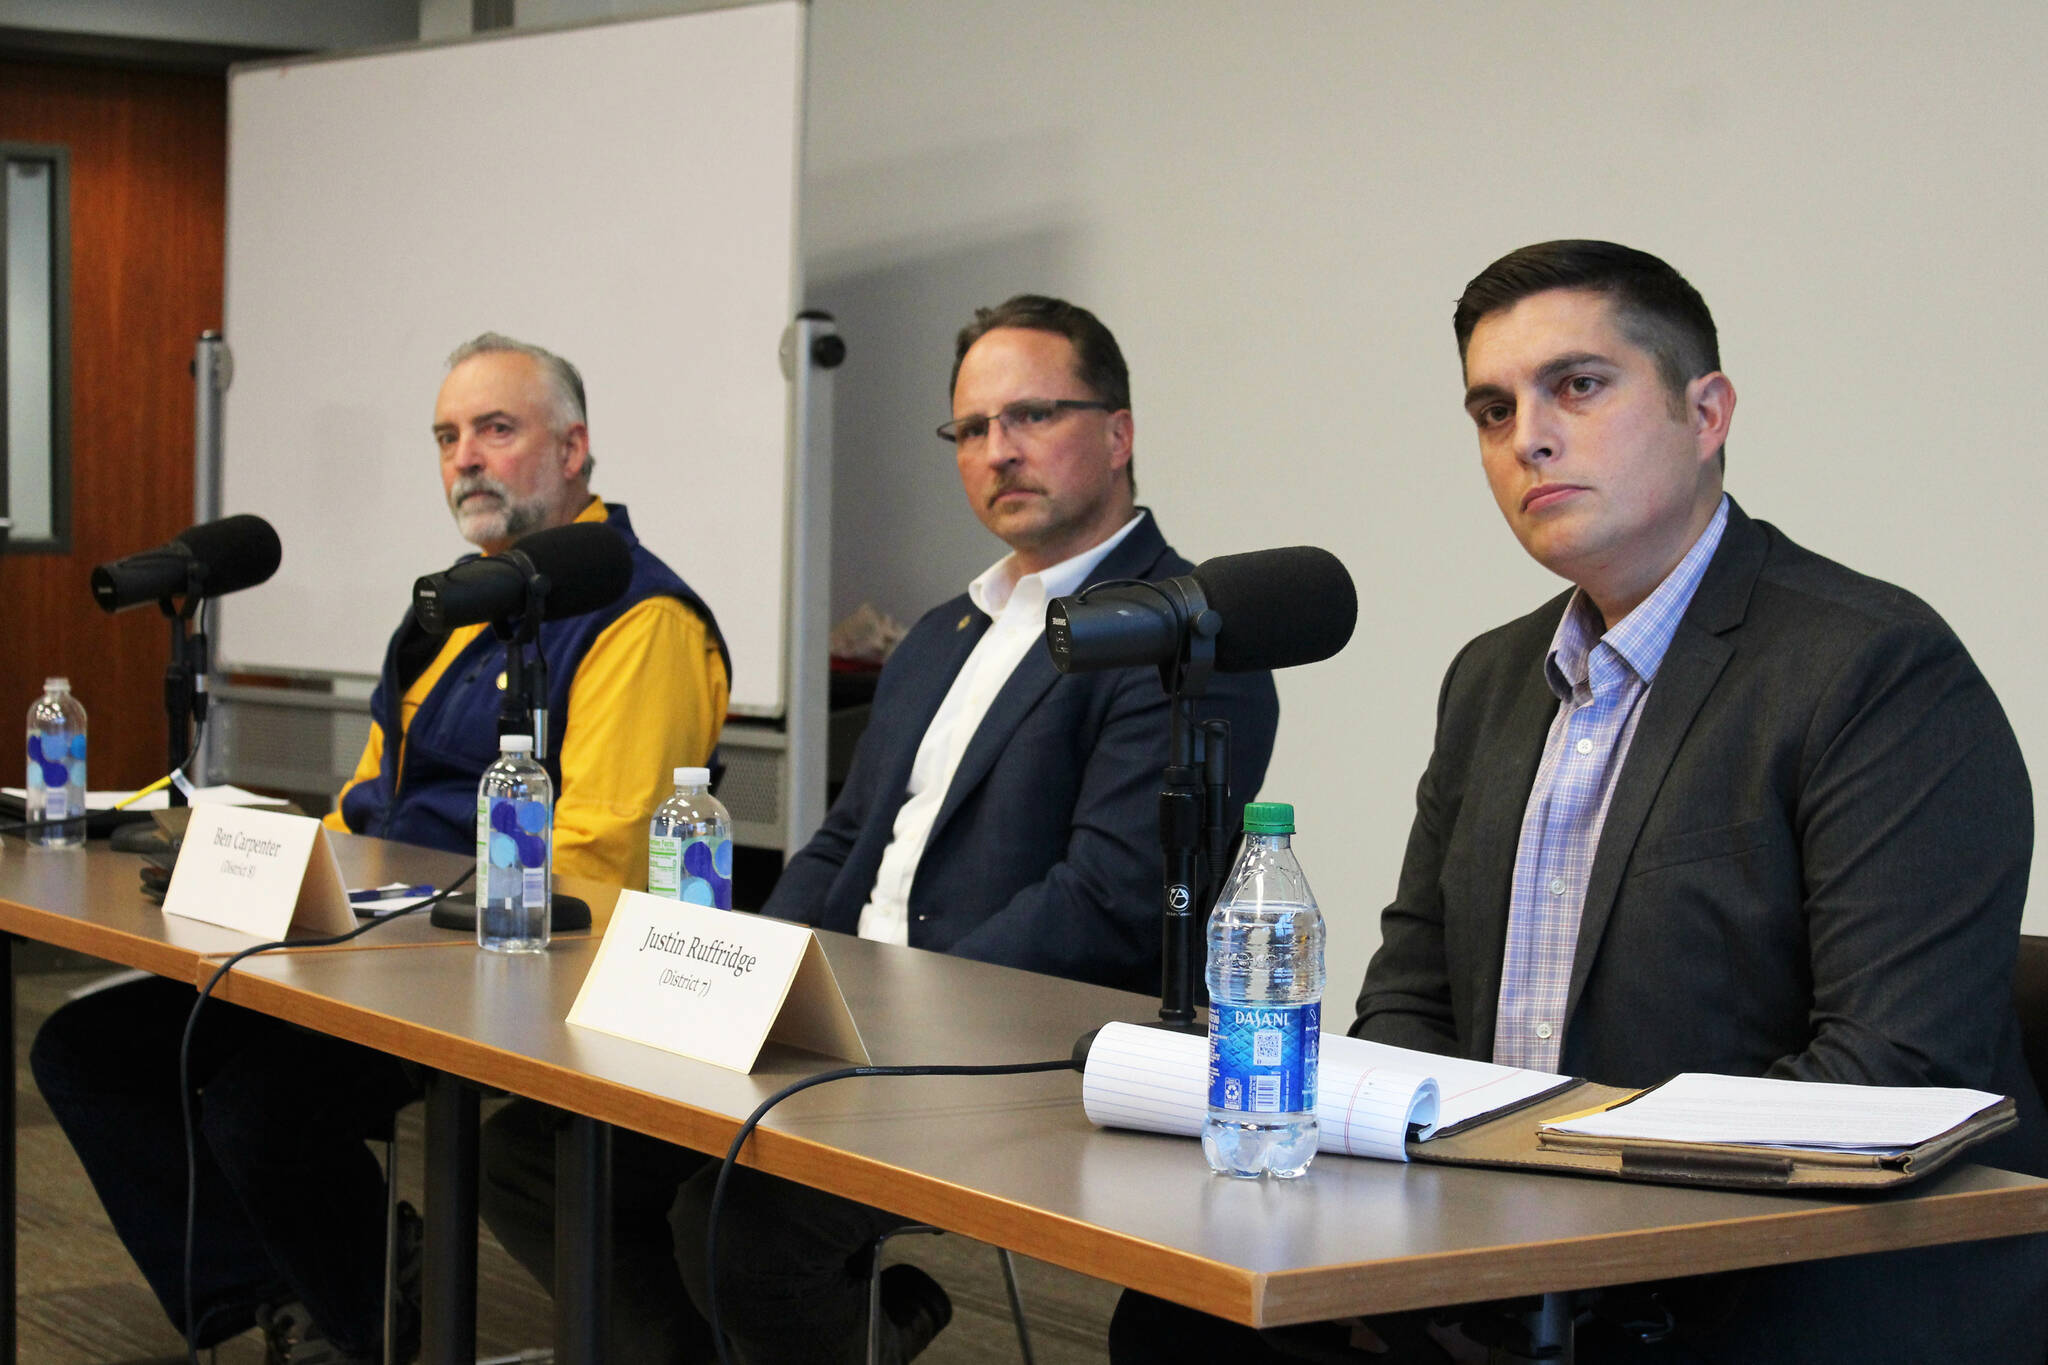 From left: Alaska State House candidates Ron Gillham, Ben Carpenter and Justin Ruffridge participate in a candidate forum on Monday, Oct. 10, 2022, in Soldotna, Alaska. (Ashlyn O’Hara/Peninsula Clarion)